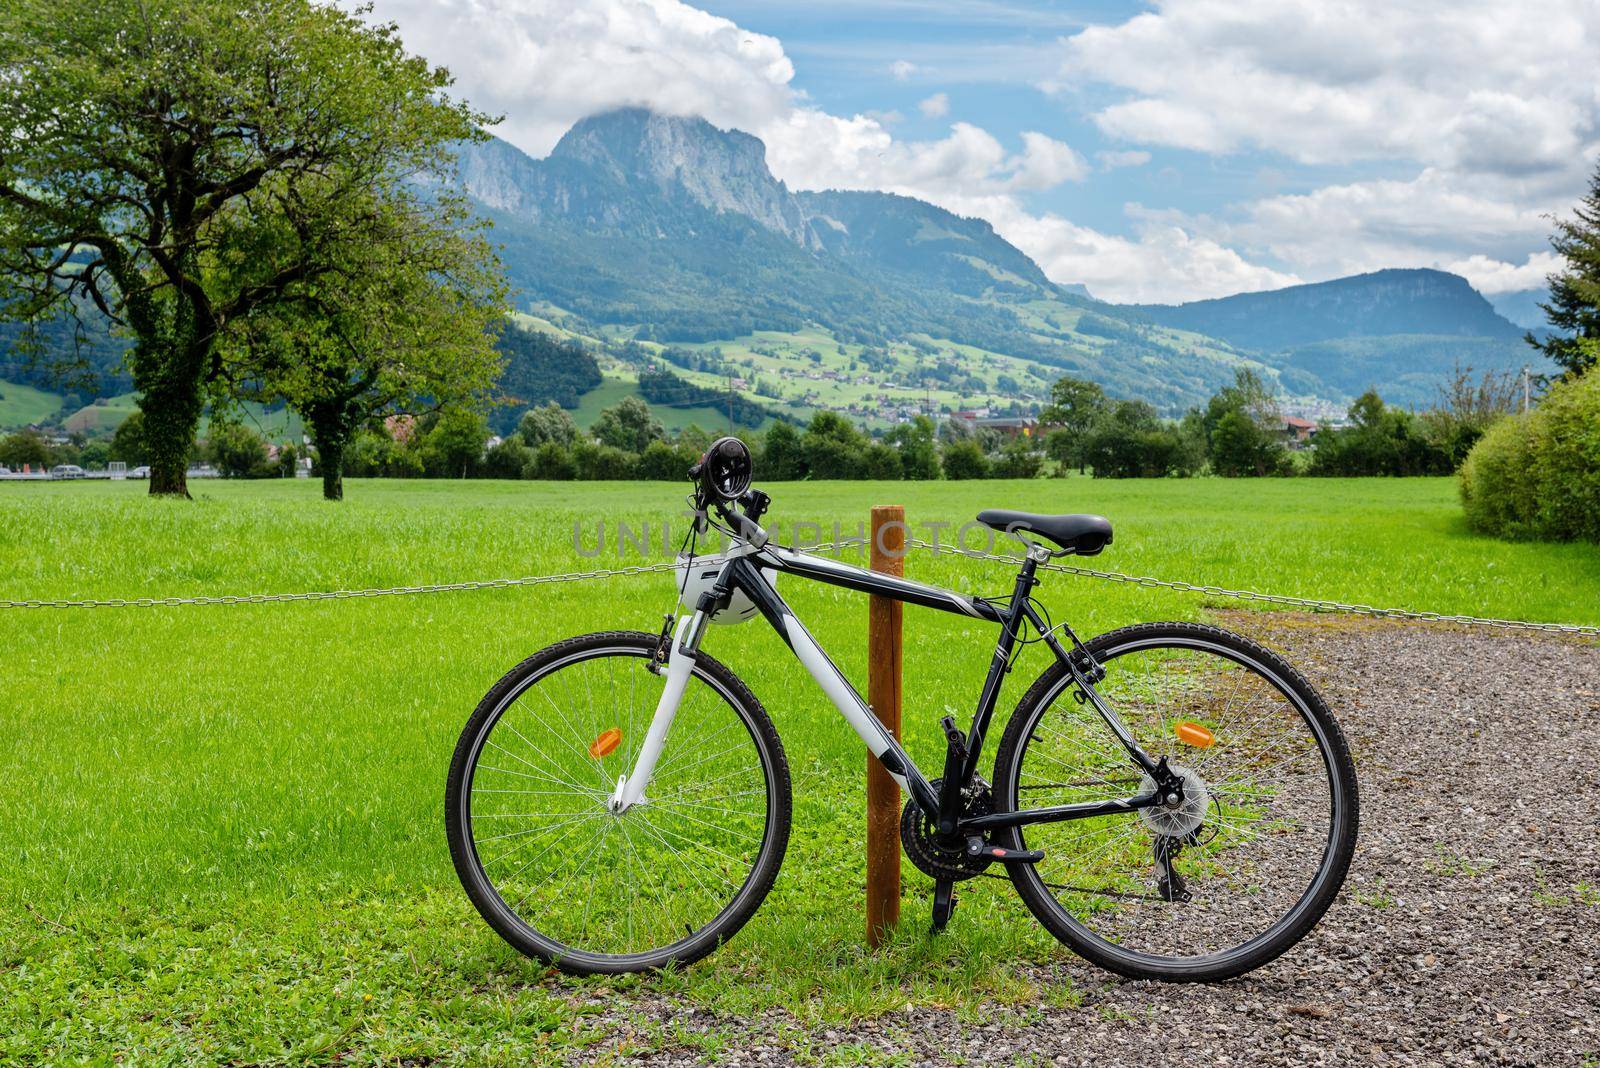 Bike and in the background the amazing Switzerland landscape.